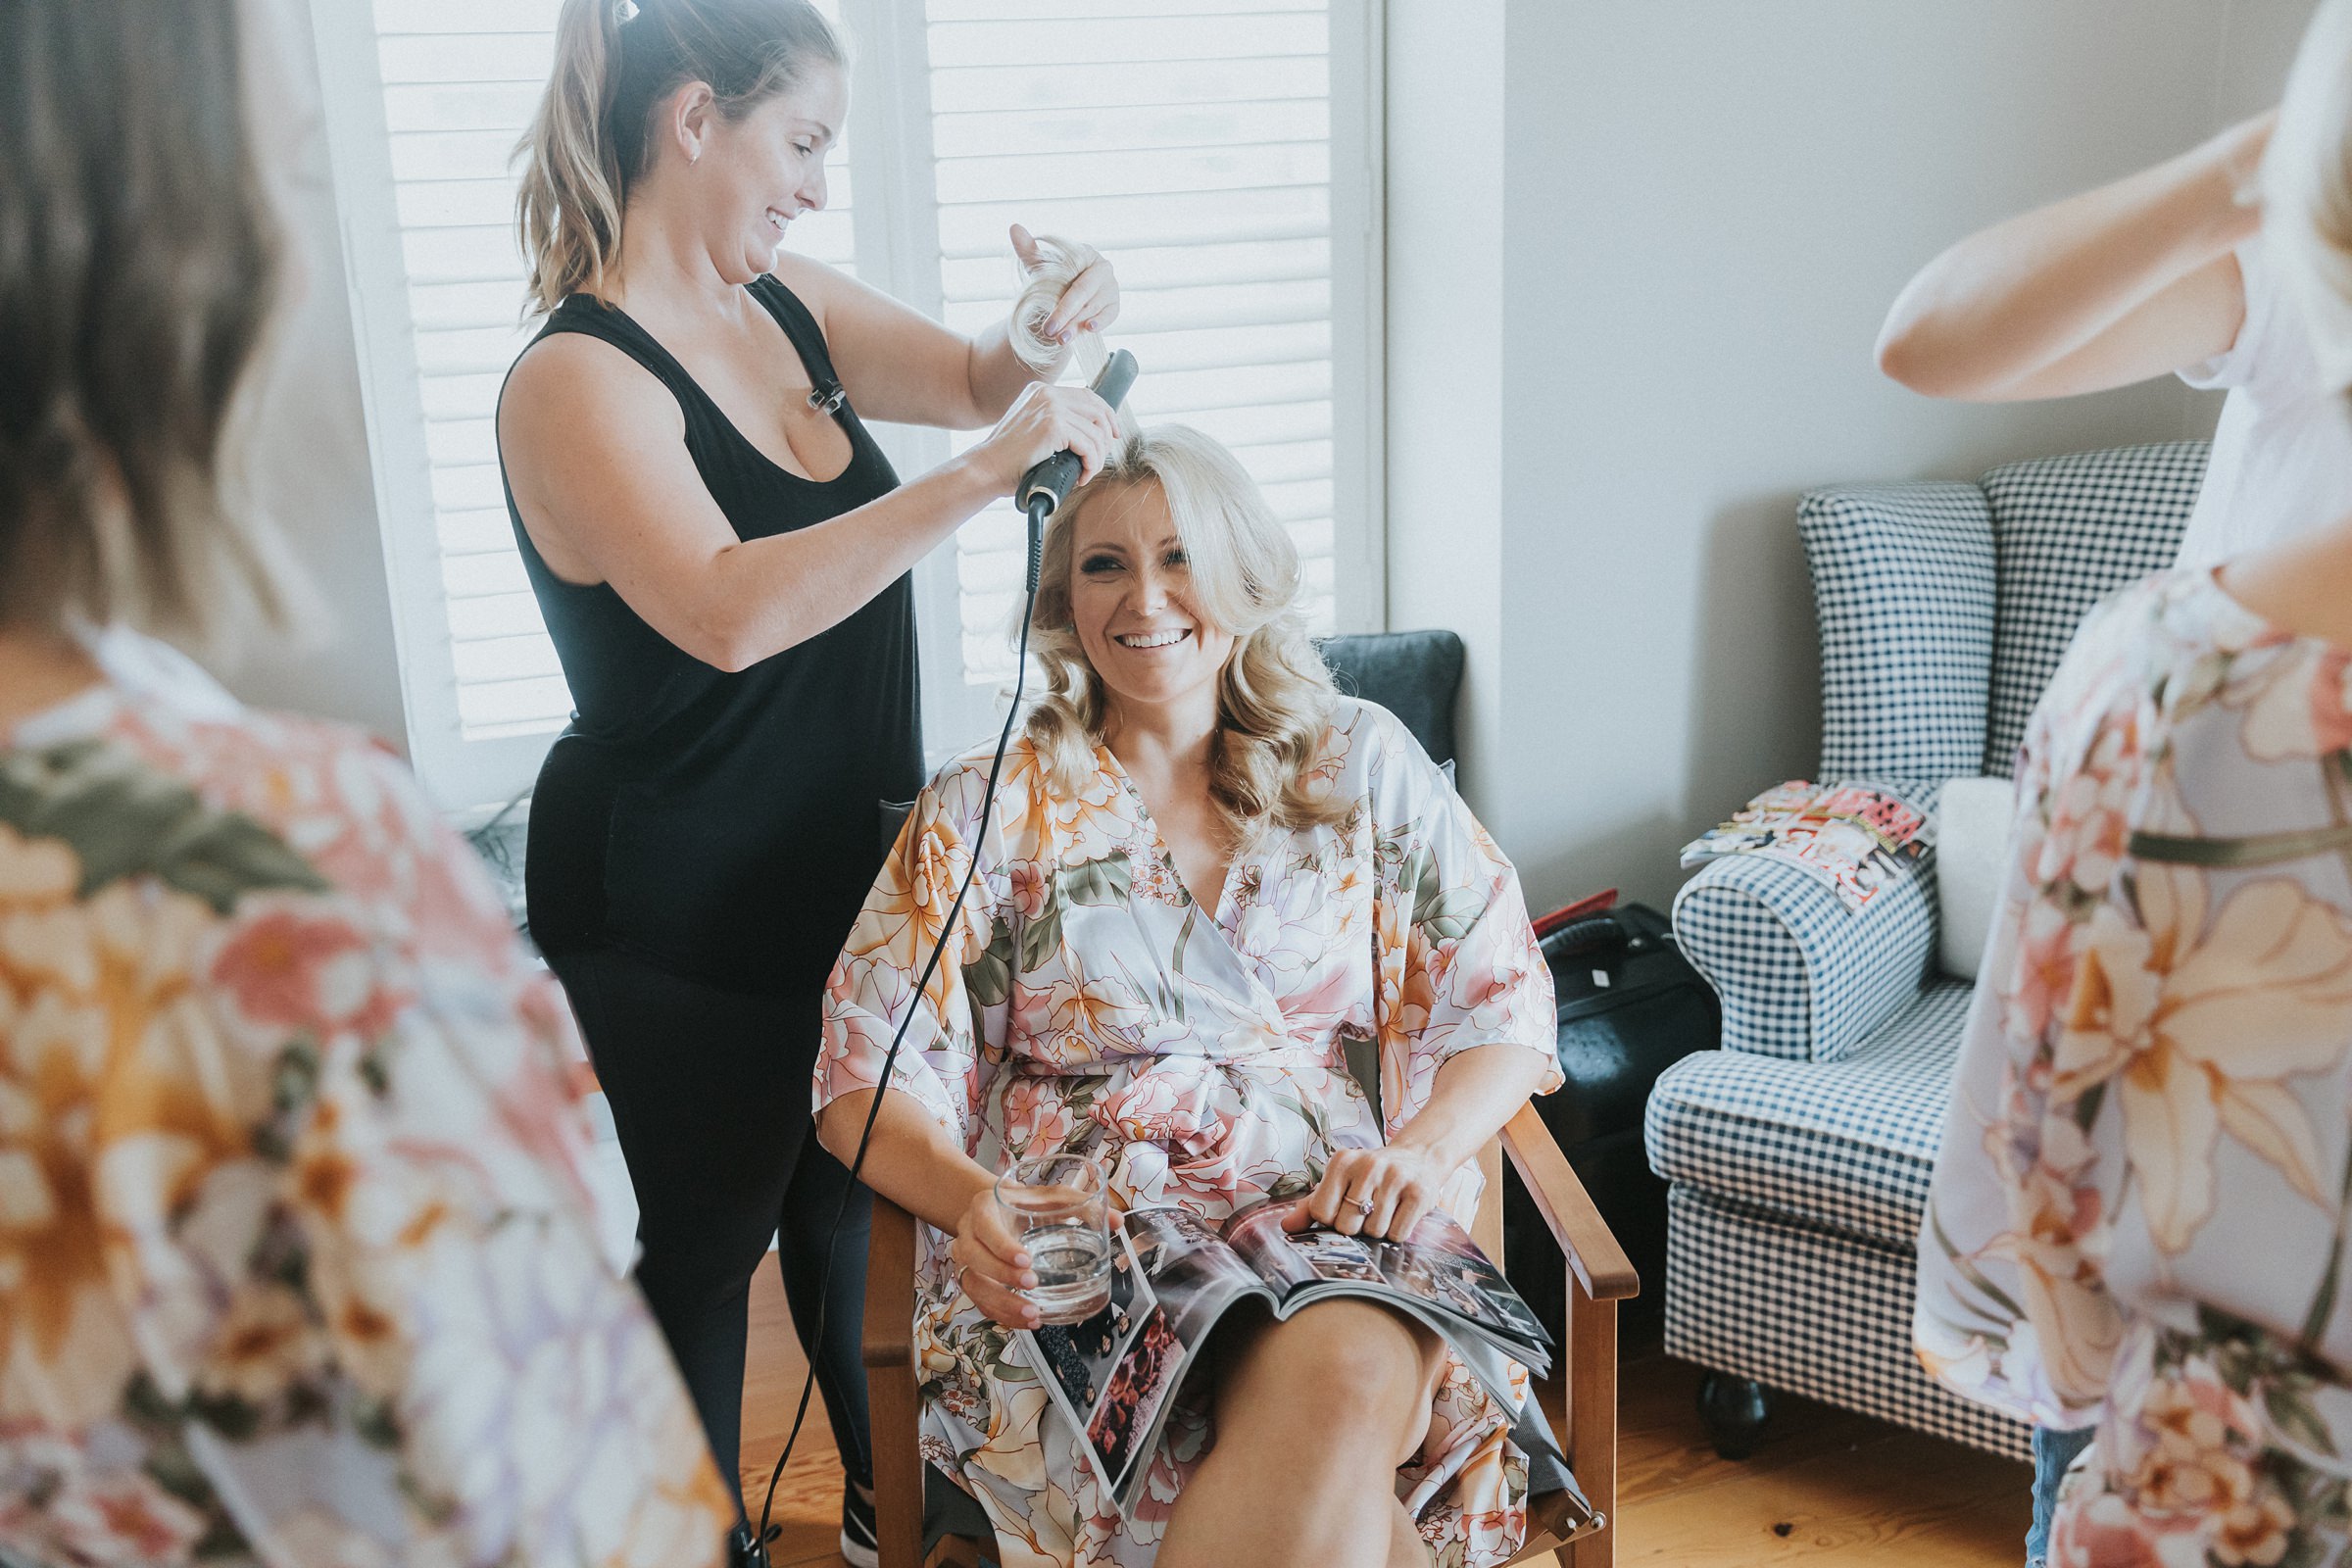 sister of the bride getting her hair done during wedding prep